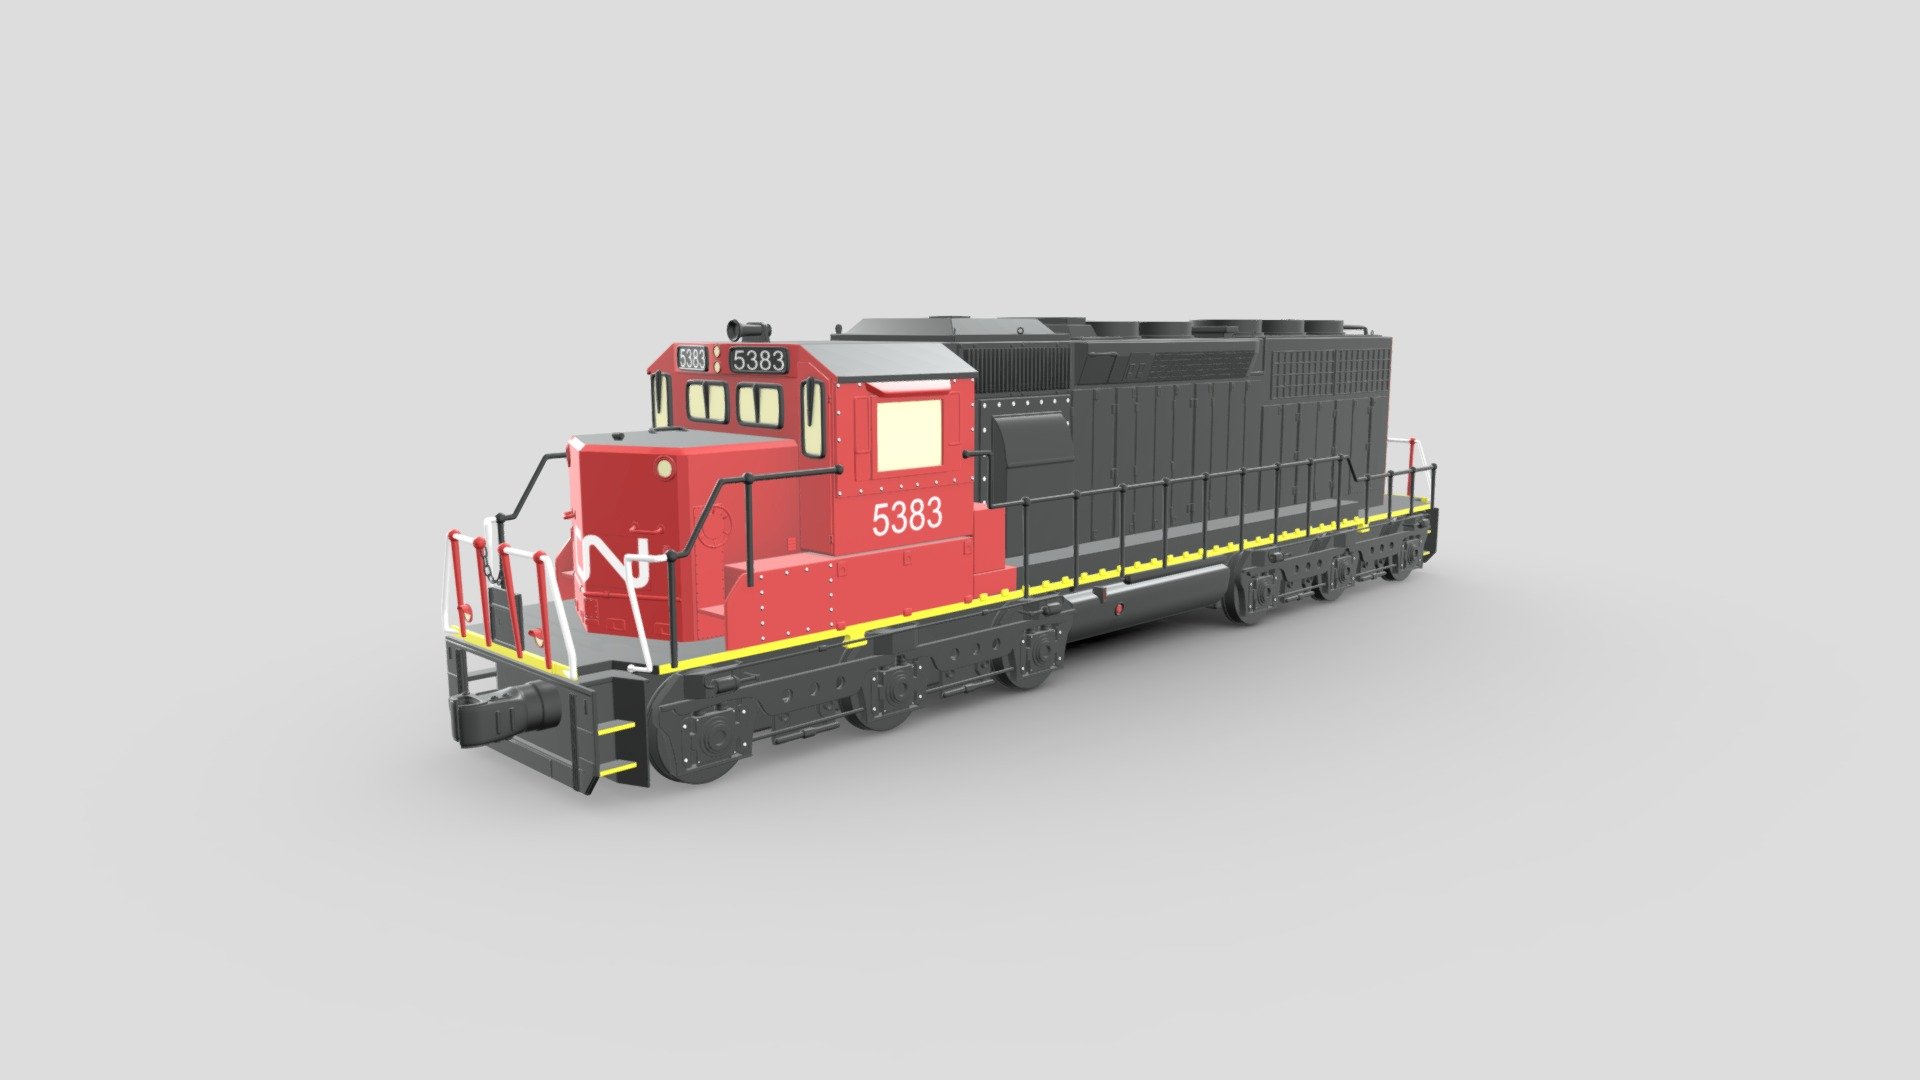 Animation shown here: https://sketchfab.com/3d-models/model-train-and-tracks-demo-animation-1f362e834c1f456782cdd89e842edaba

3D Model Train collection that I made using Blender. It includes a train model, a simple animation, and the train track models. This is a high poly model that is great for rendering but can also be used in game development.

Features:




Model train 3D model with 5 separate model sets parented accordingly

Model track with rails, railway ties, and gravel

Sample animation showing the train going around a track

PBR textures in 4K, 2K, and 1K resolutions

Each model has been manually UV unwrapped

Overlapping UVs on duplicate mesh parts to save texture space

Blend files include pre-applied textures as well as camera setups

Lighting provided by the included HDRi map downloaded from HDRi Haven

FBX, OBJ, GLTF/GLB, DAE/Collada file formats

Included Textures:




AO, Diffuse, Roughness, Gloss, Metallic, Normal

UVLayout

 - Model Train Collection - Buy Royalty Free 3D model by Pickle55100 3d model